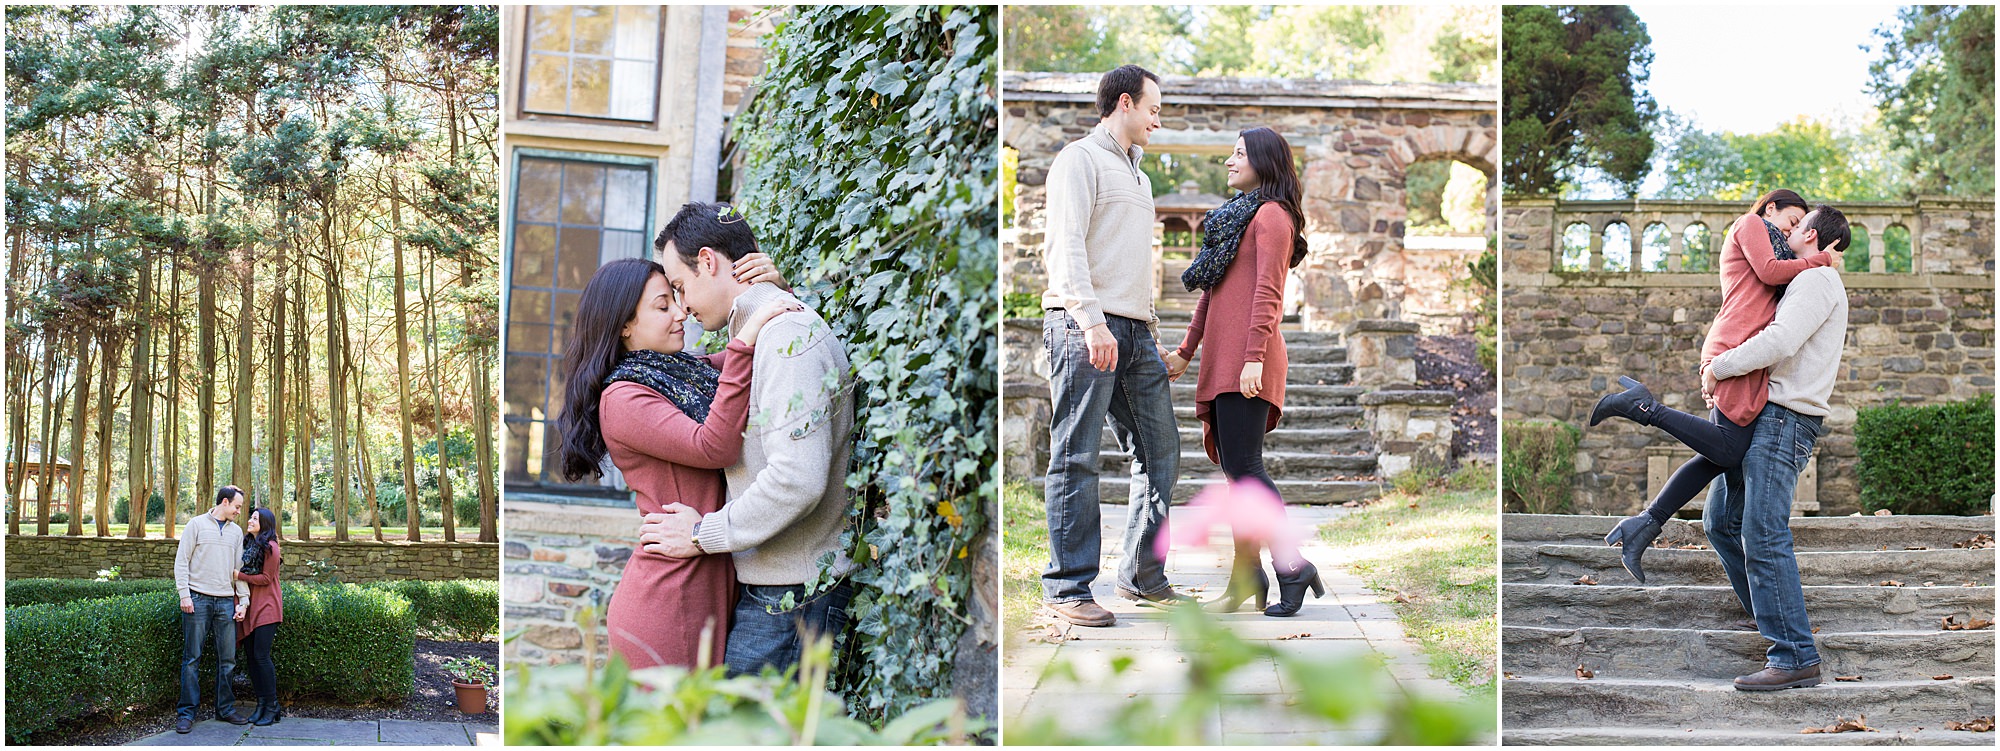 Ridley Creek engagement session